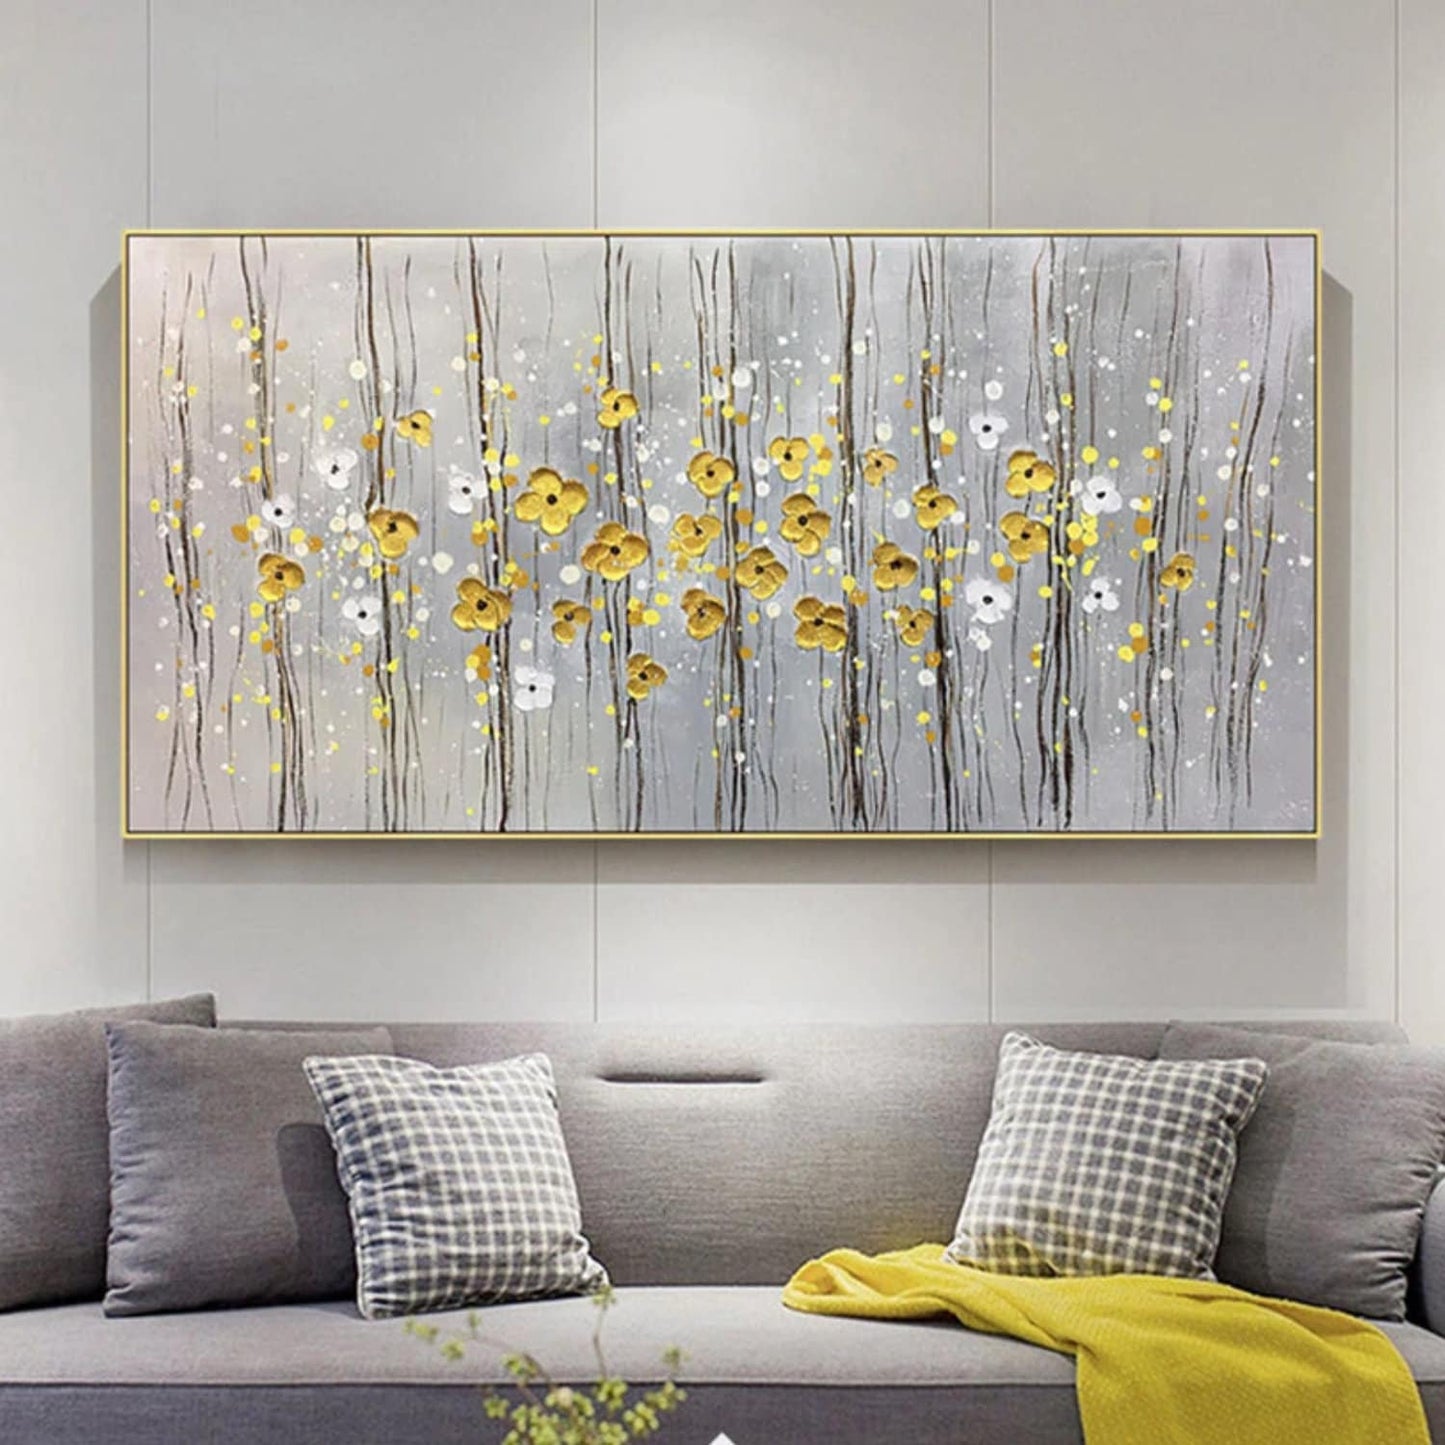 3D Textured Wall Hanging Golden Flowers Painting